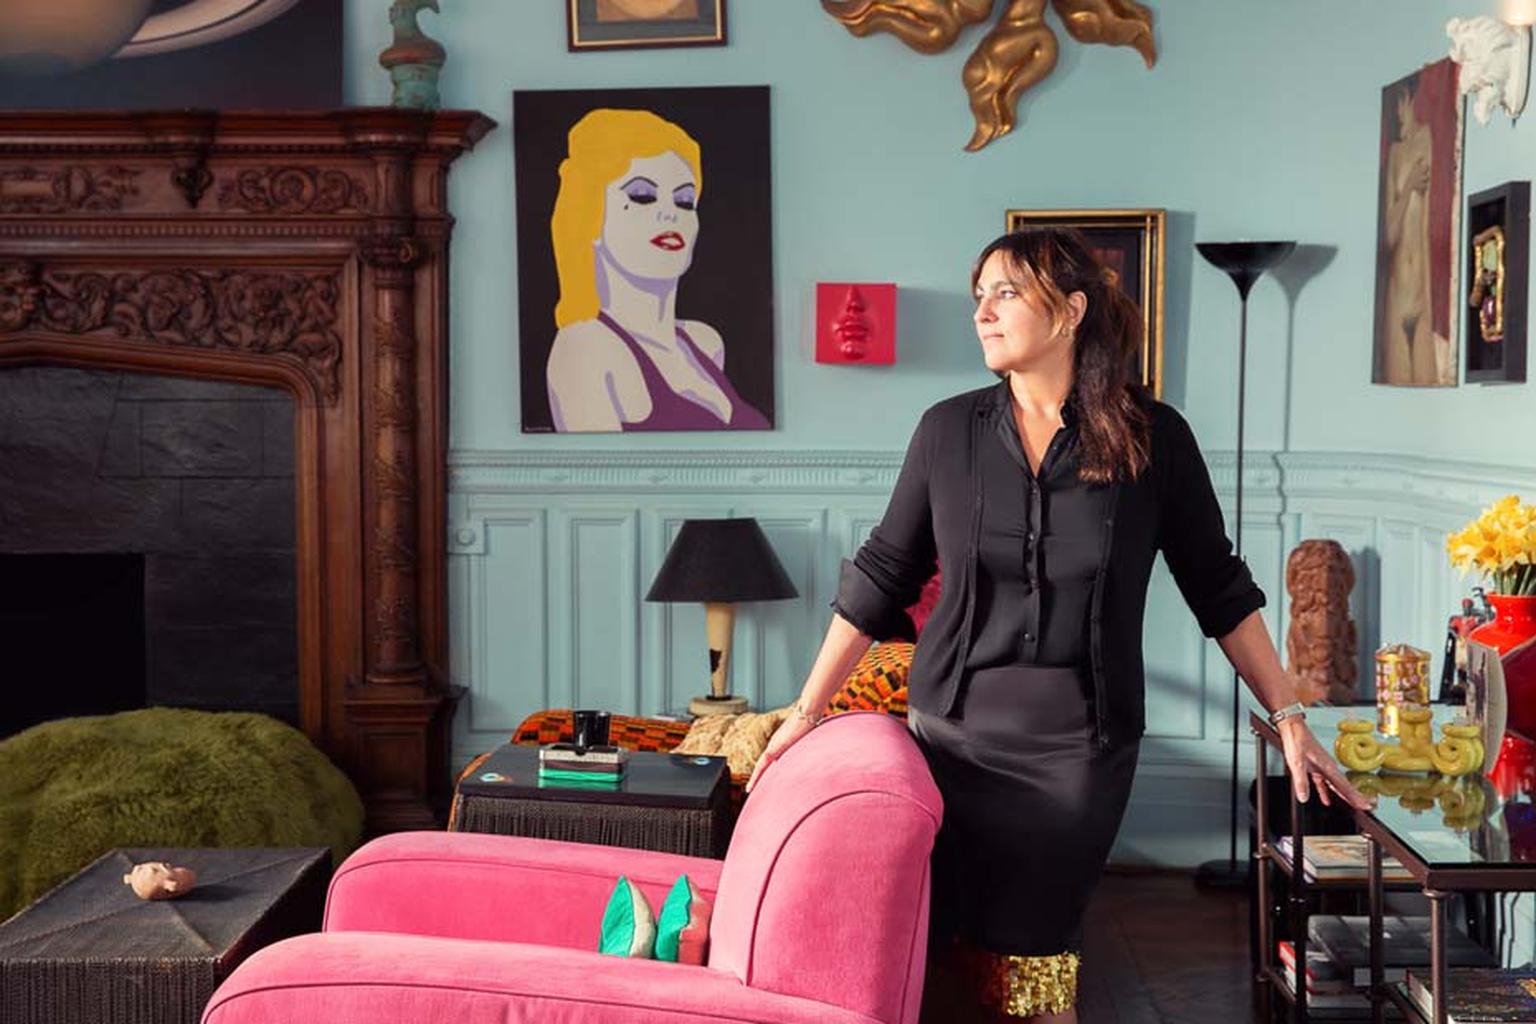 British designer Solange Azagury-Partridge, pictured at her impressive Mayfair townhouse. One of Britain's most exciting and original jewellers, she is curating an online auction of art, jewellery and design for Paddle8 from 5-19 May 2015.